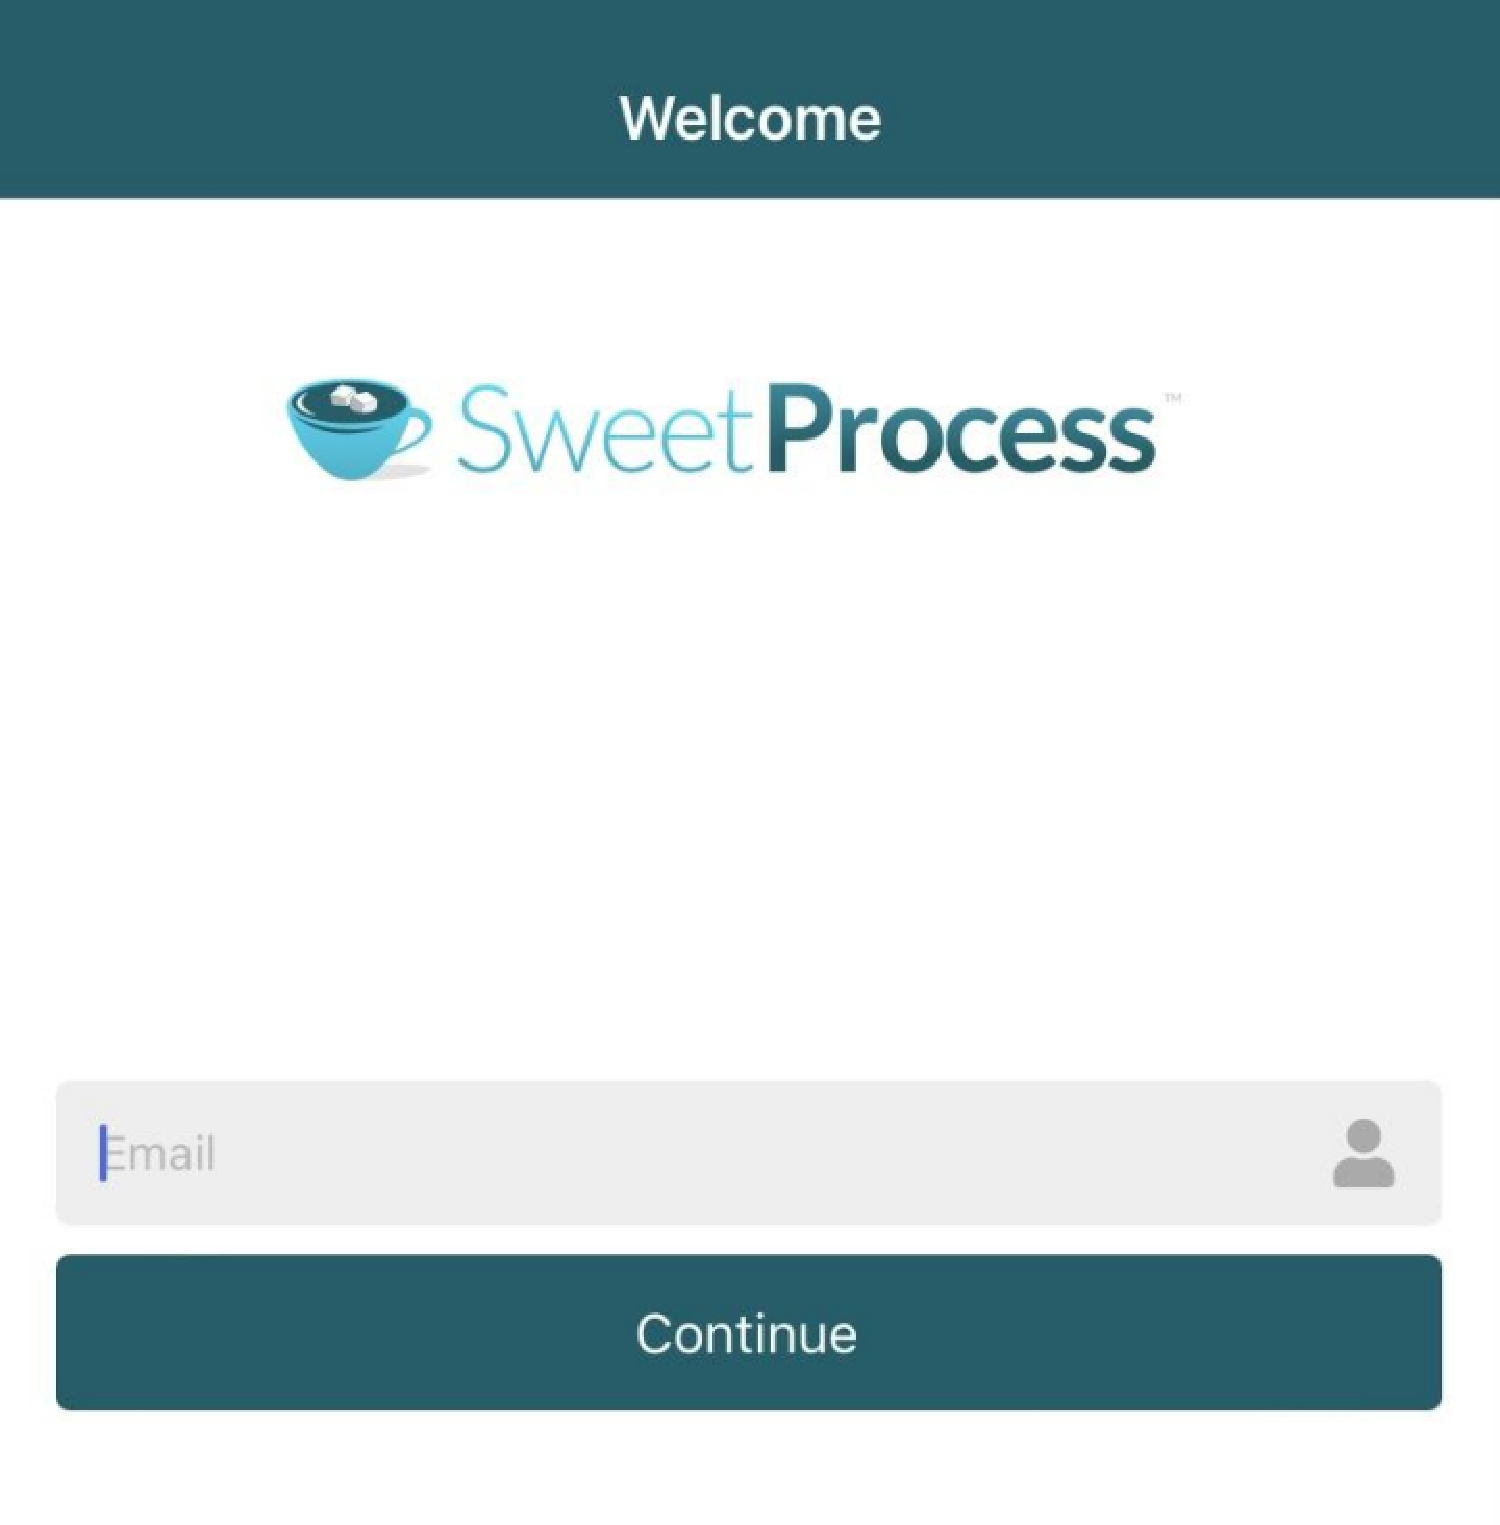 Open the app and log in to your SweetProcess account.